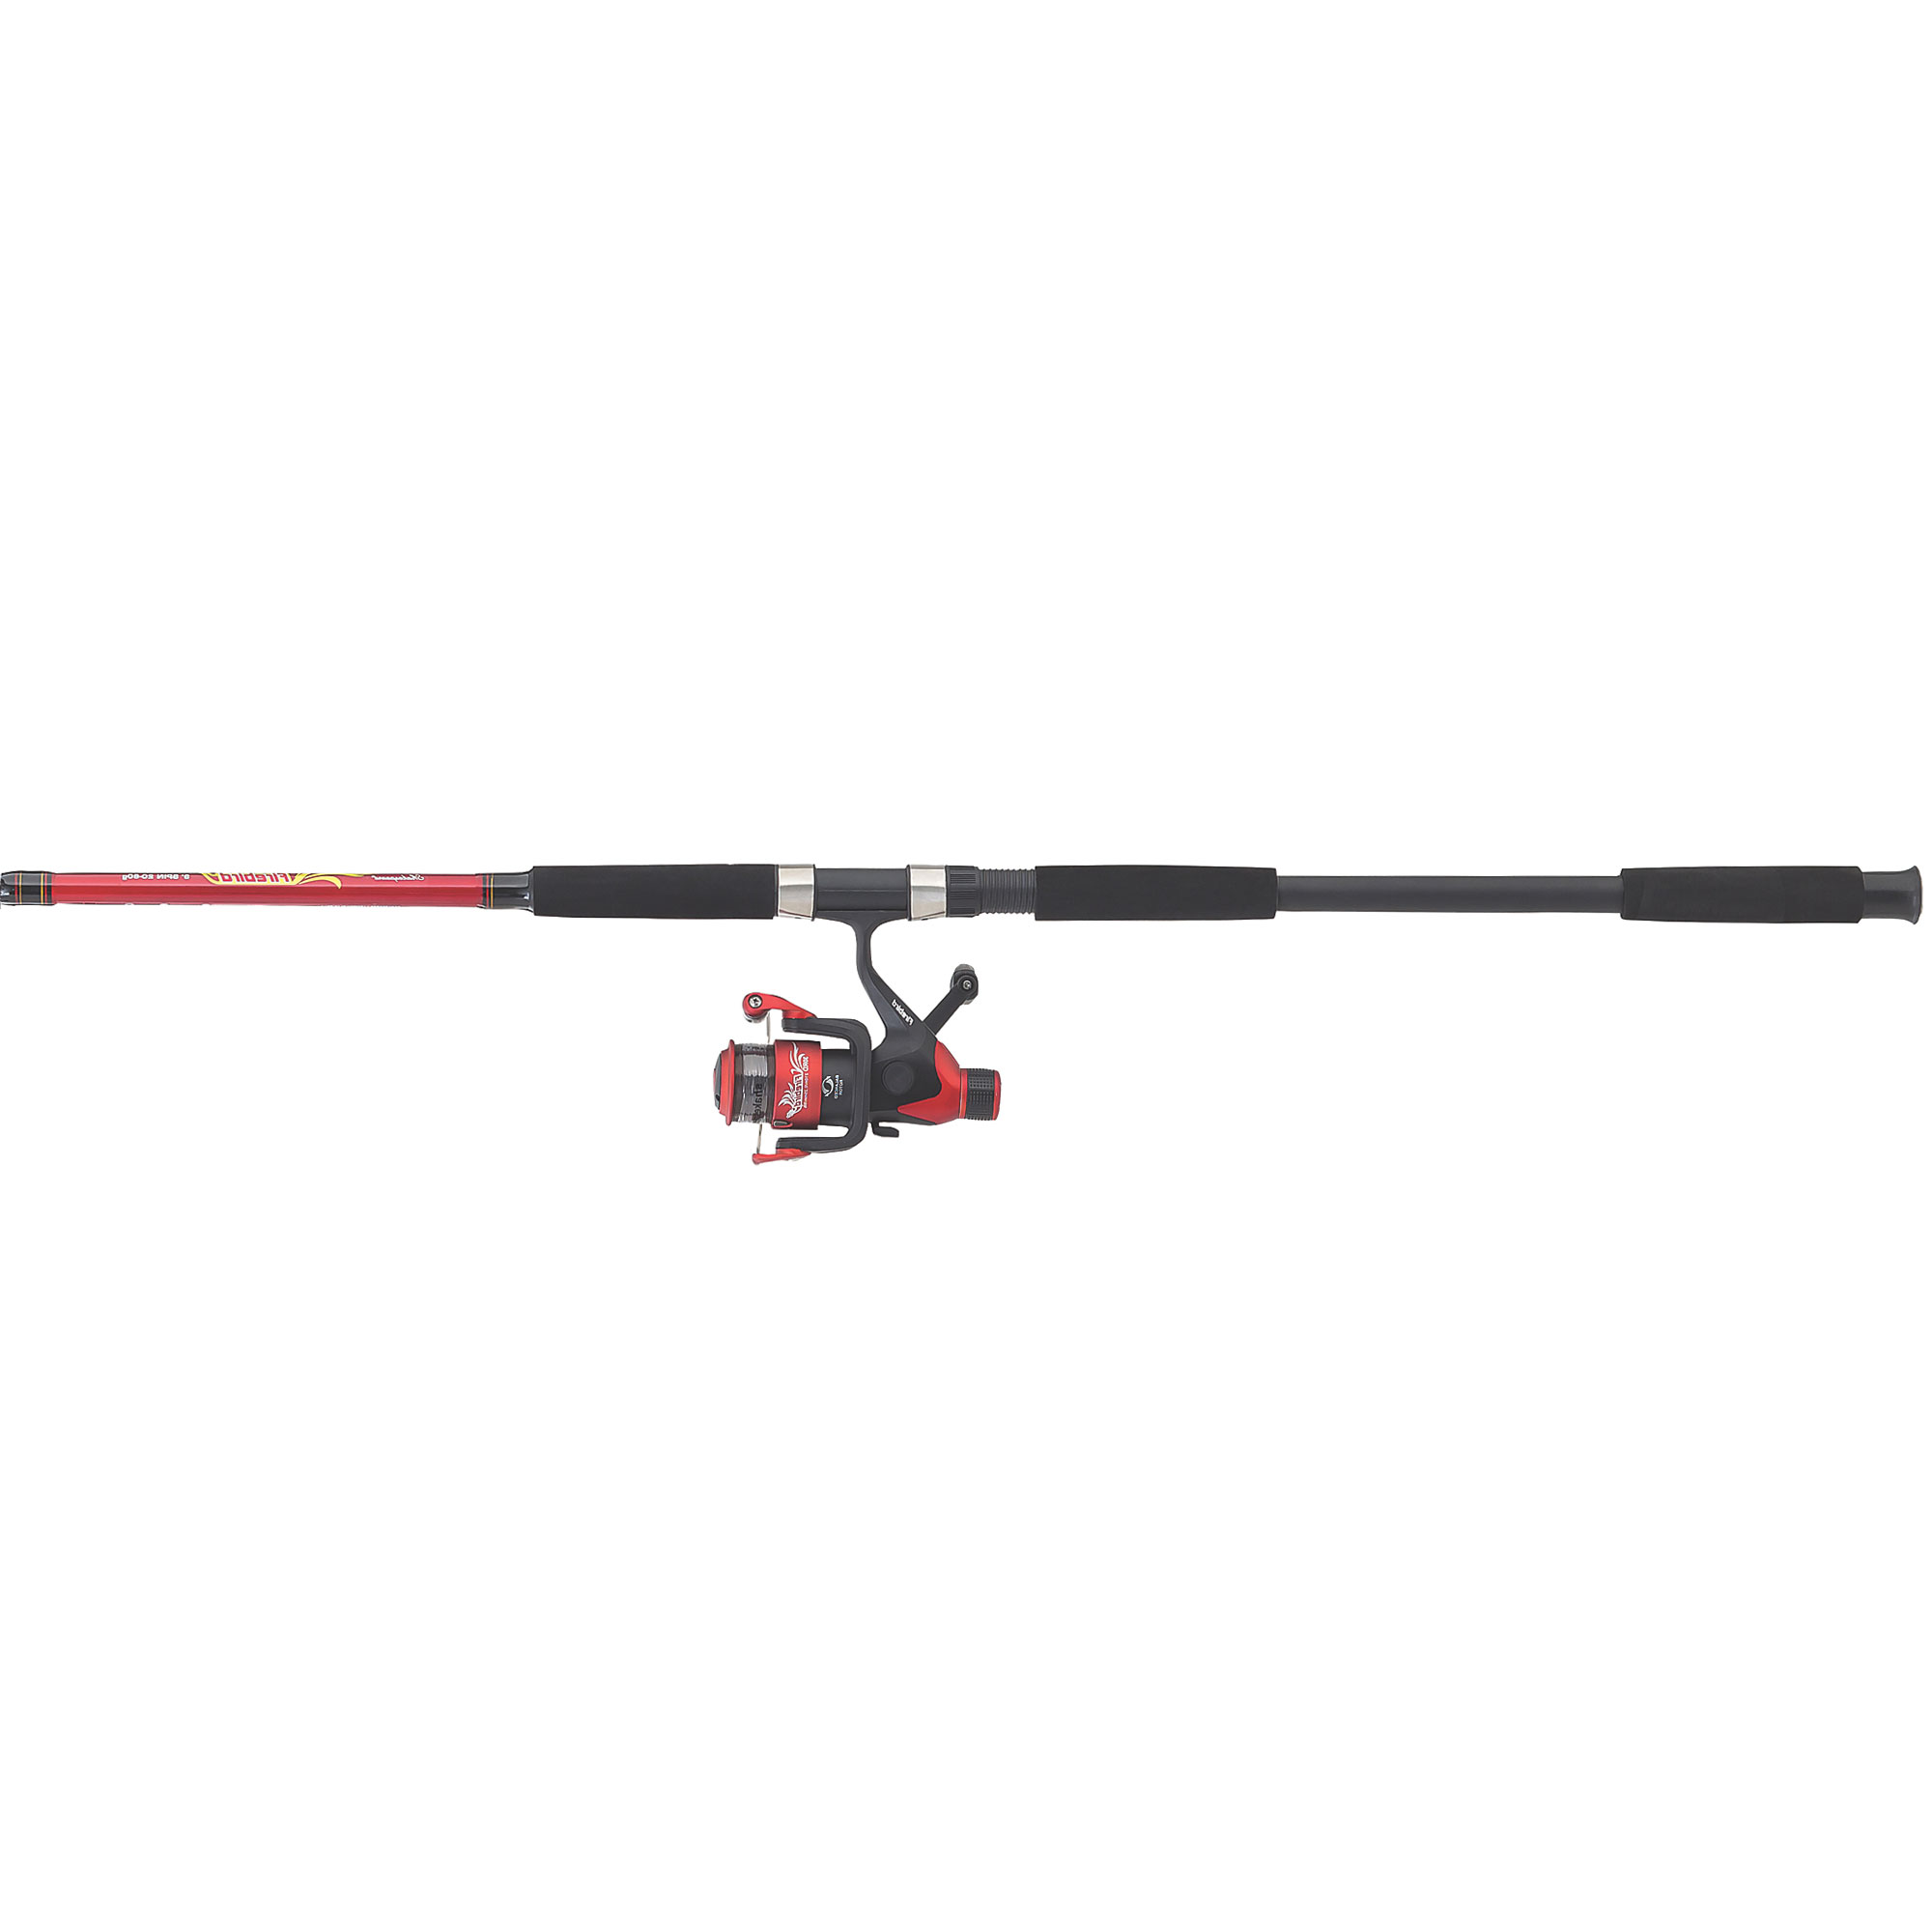 For Saltwater and Freshwater Shakespeare Firebird Telescopic Folding Fishing Rod and Reel Combo Set Compact Complete Spinning Setup with Line 